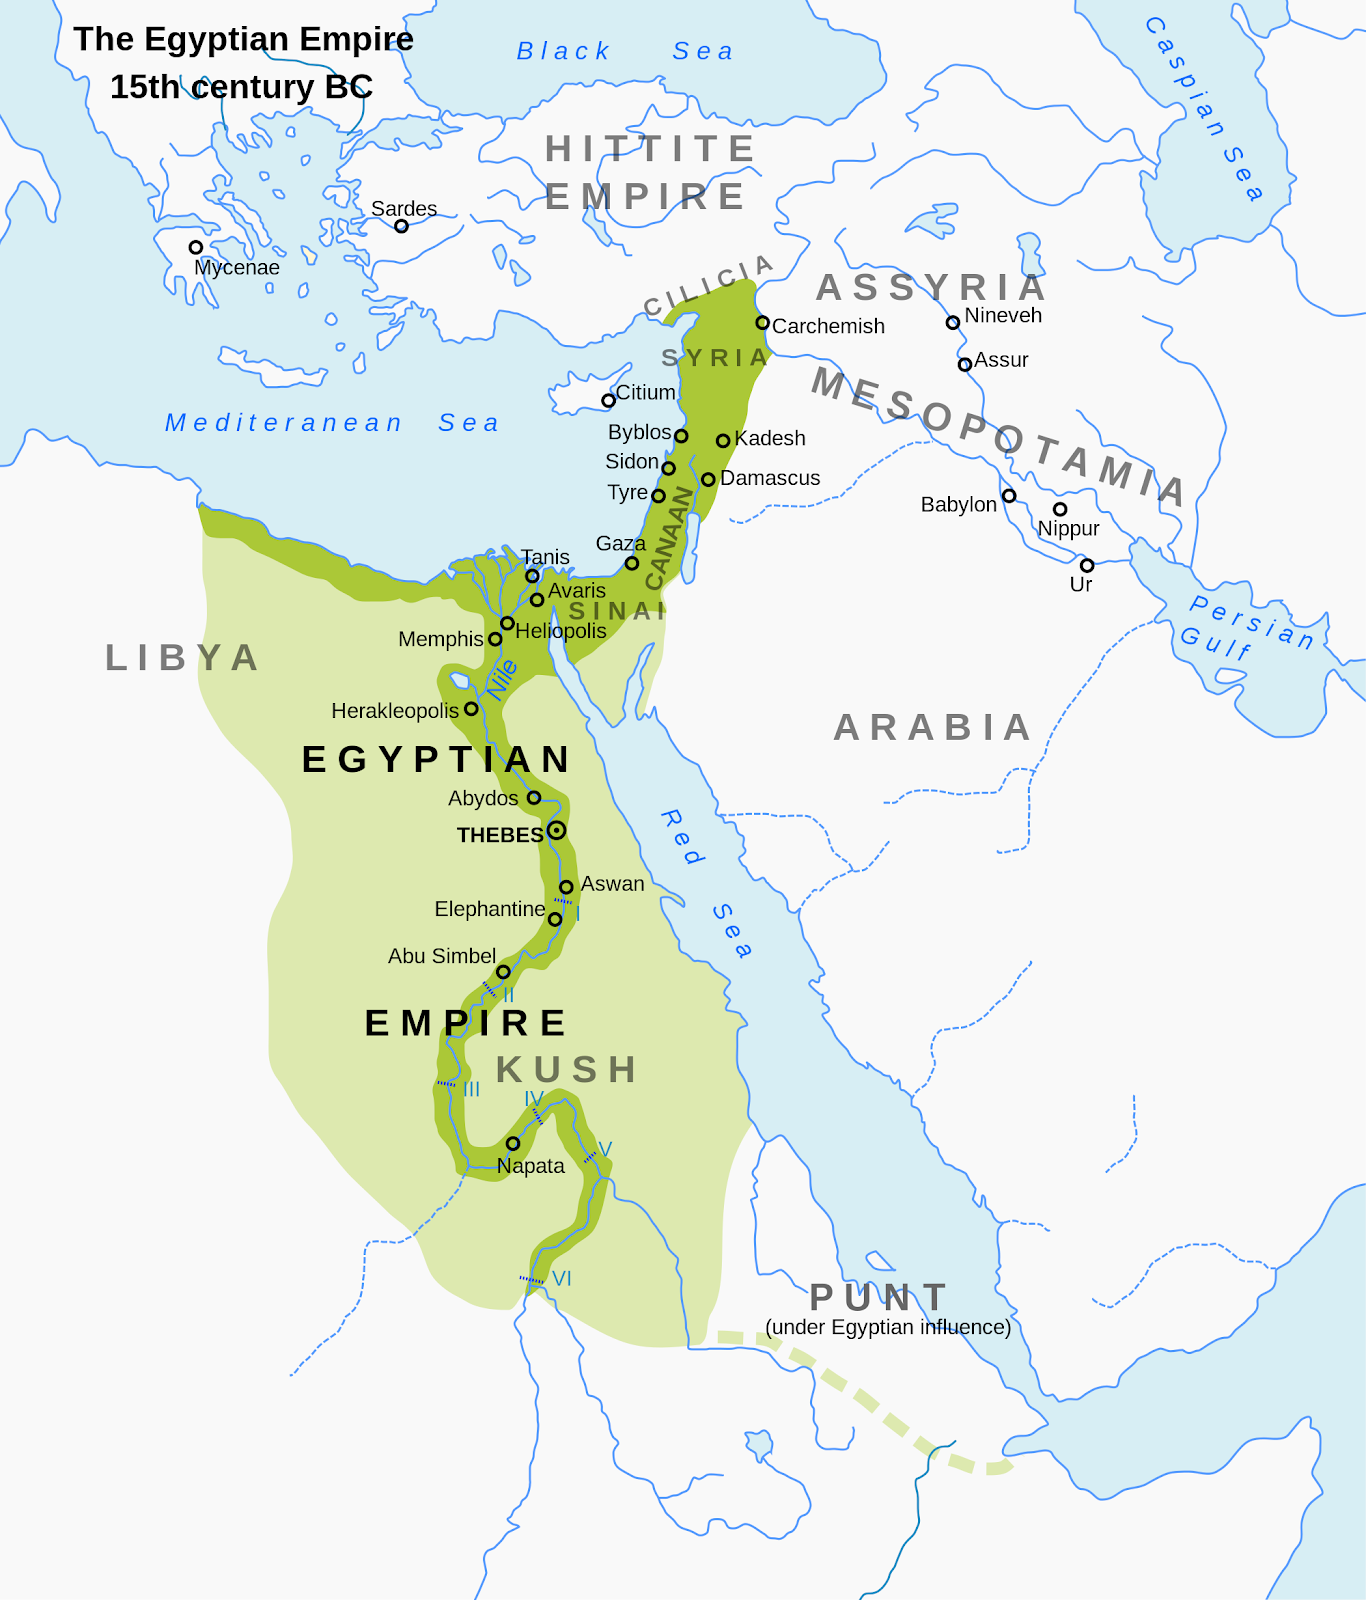 Egypt during its Imperialistic New Kingdom, c. 1400 BCE | Author: Jeff Dahl | Source: Wikimedia Commons | License: CC BY-SA 3.0